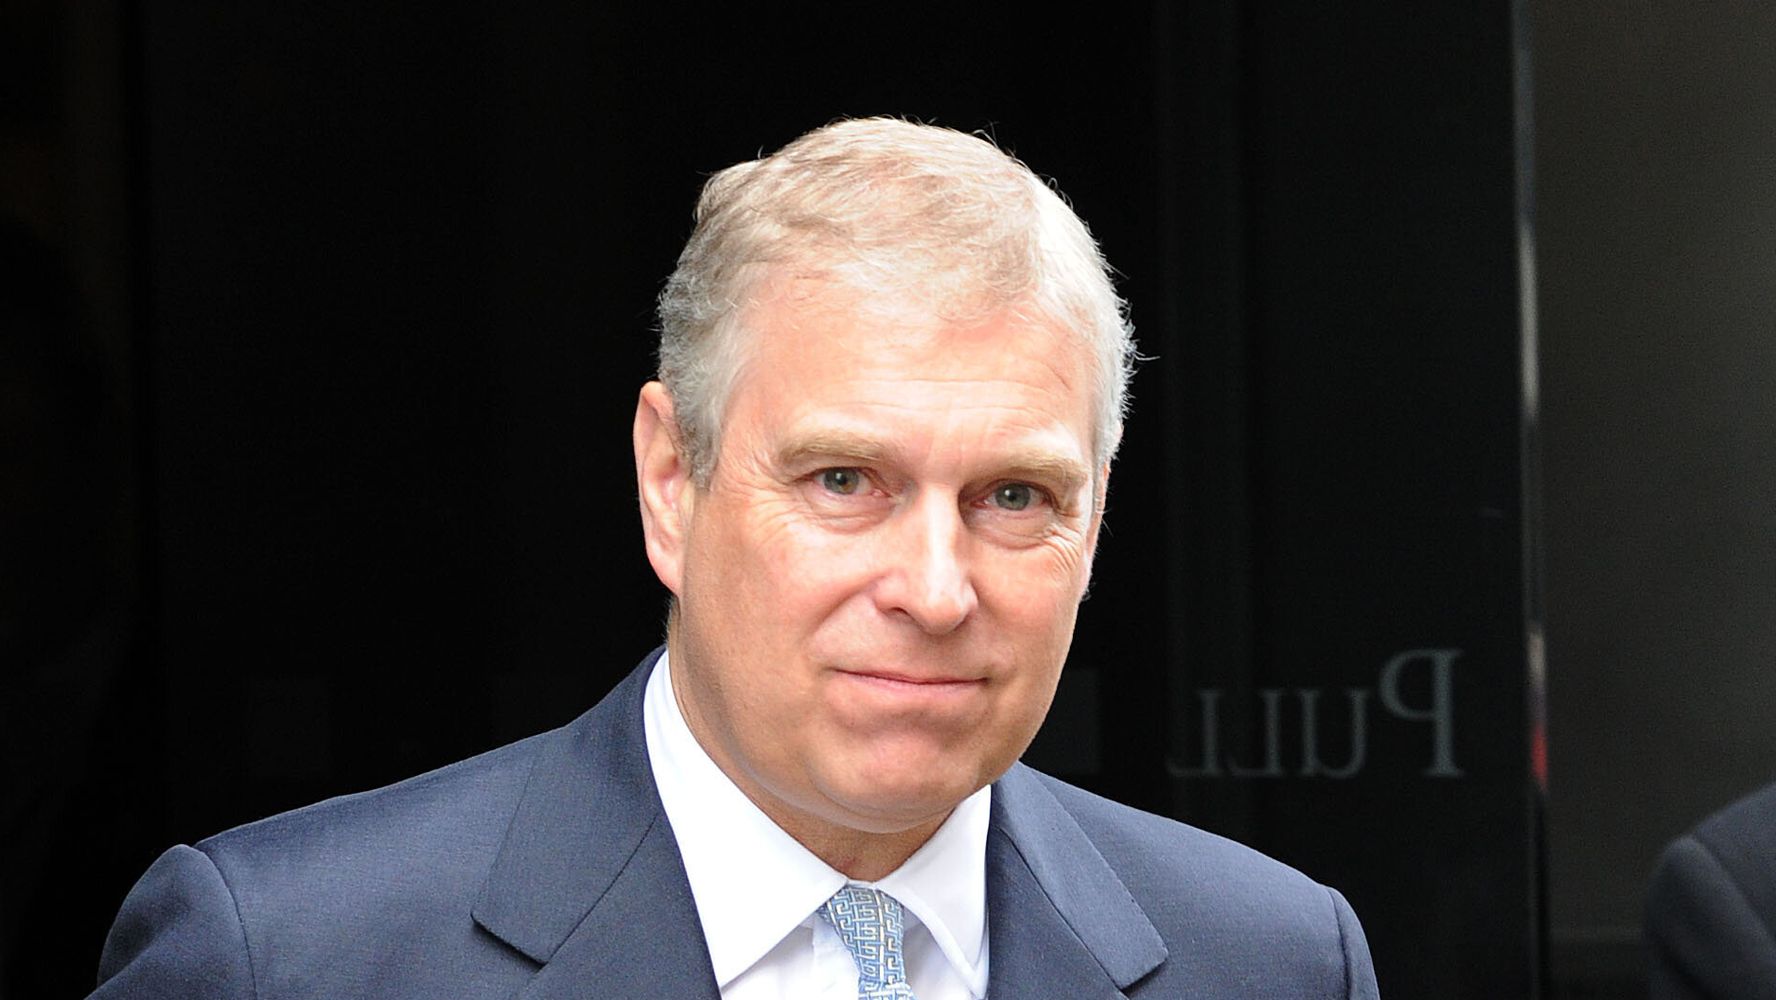 London Police Chief Says Prince Andrew Case Is Under Review